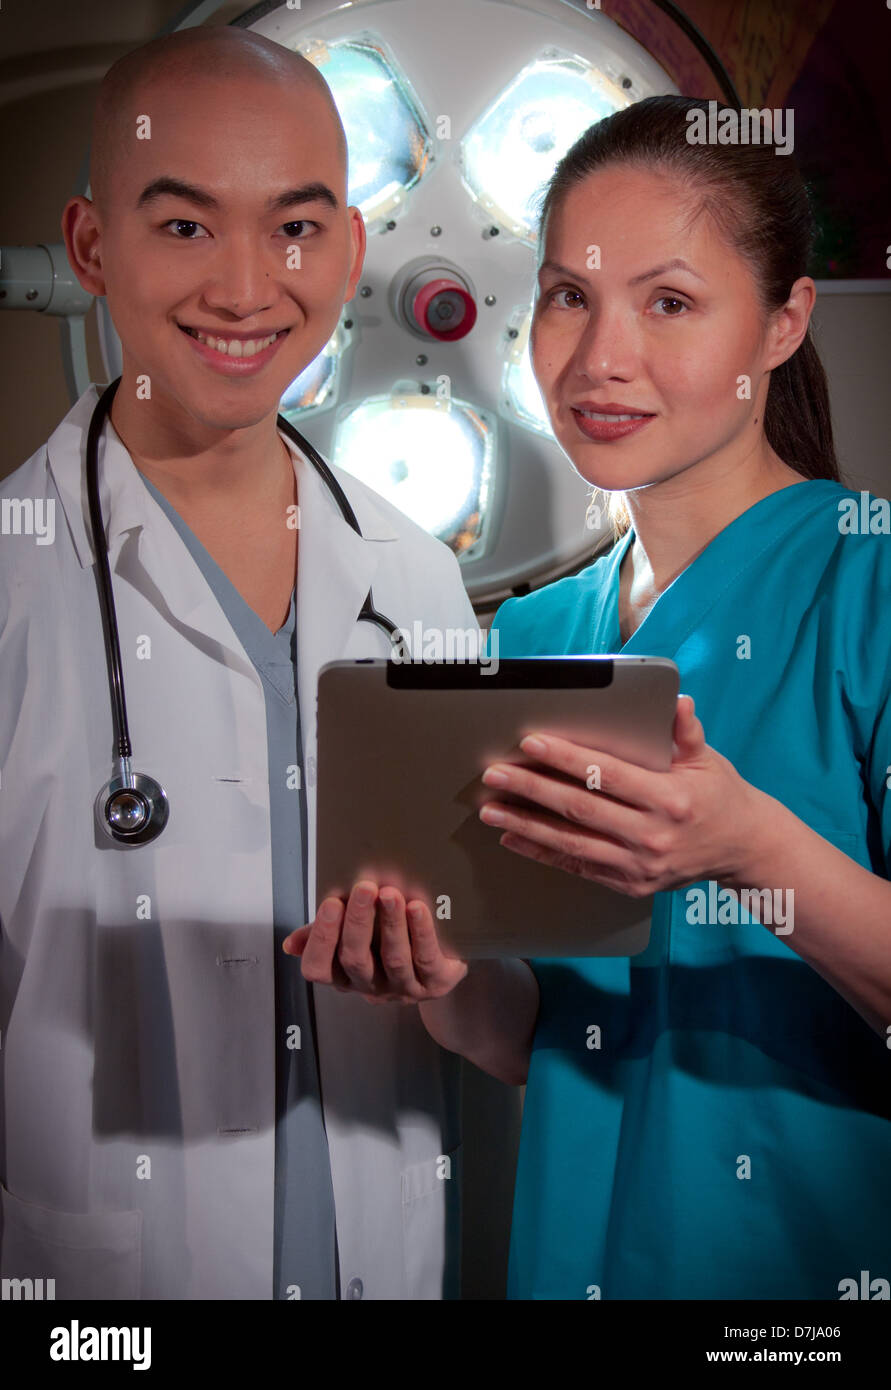 Health care professionals with tablet. Stock Photo